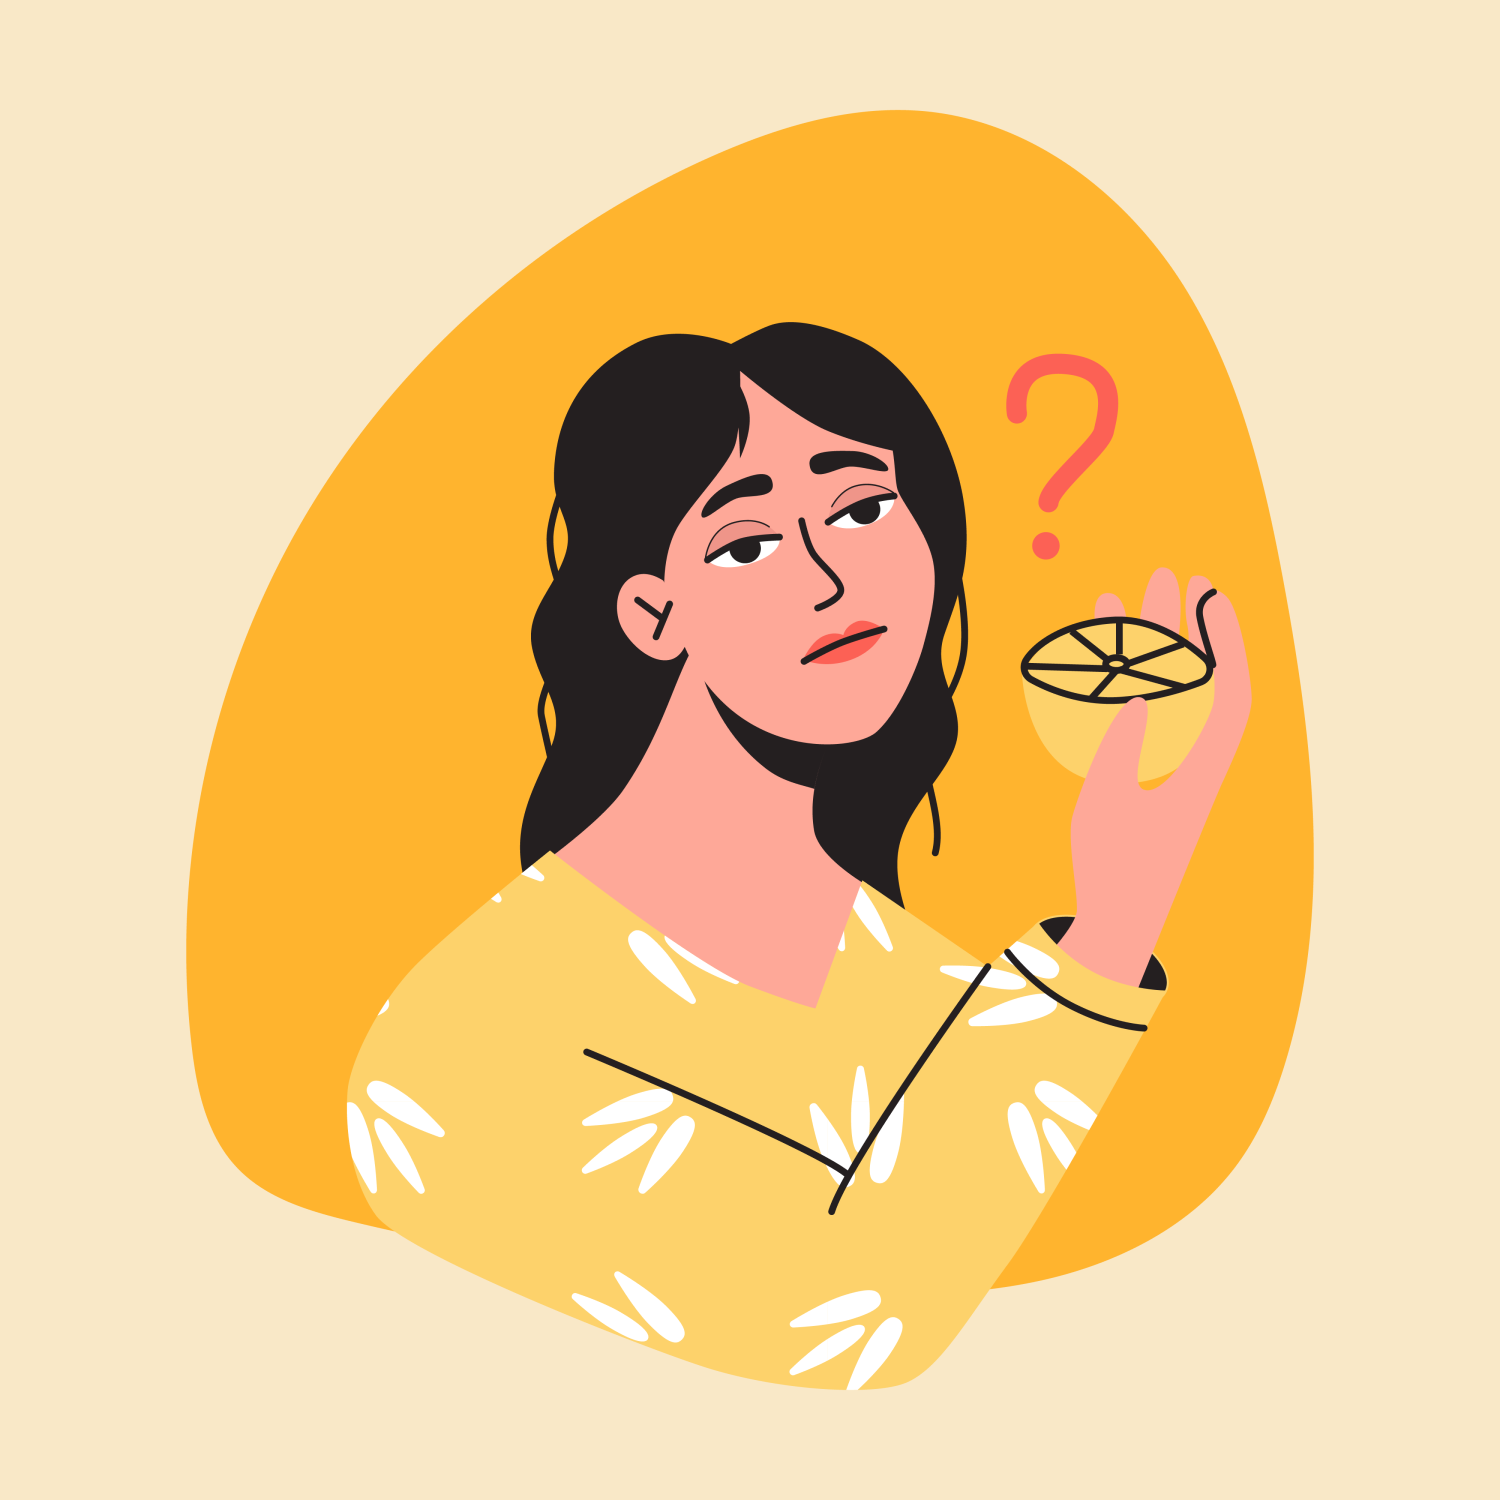 An illustration of a woman holding a lemon dealing with long covid